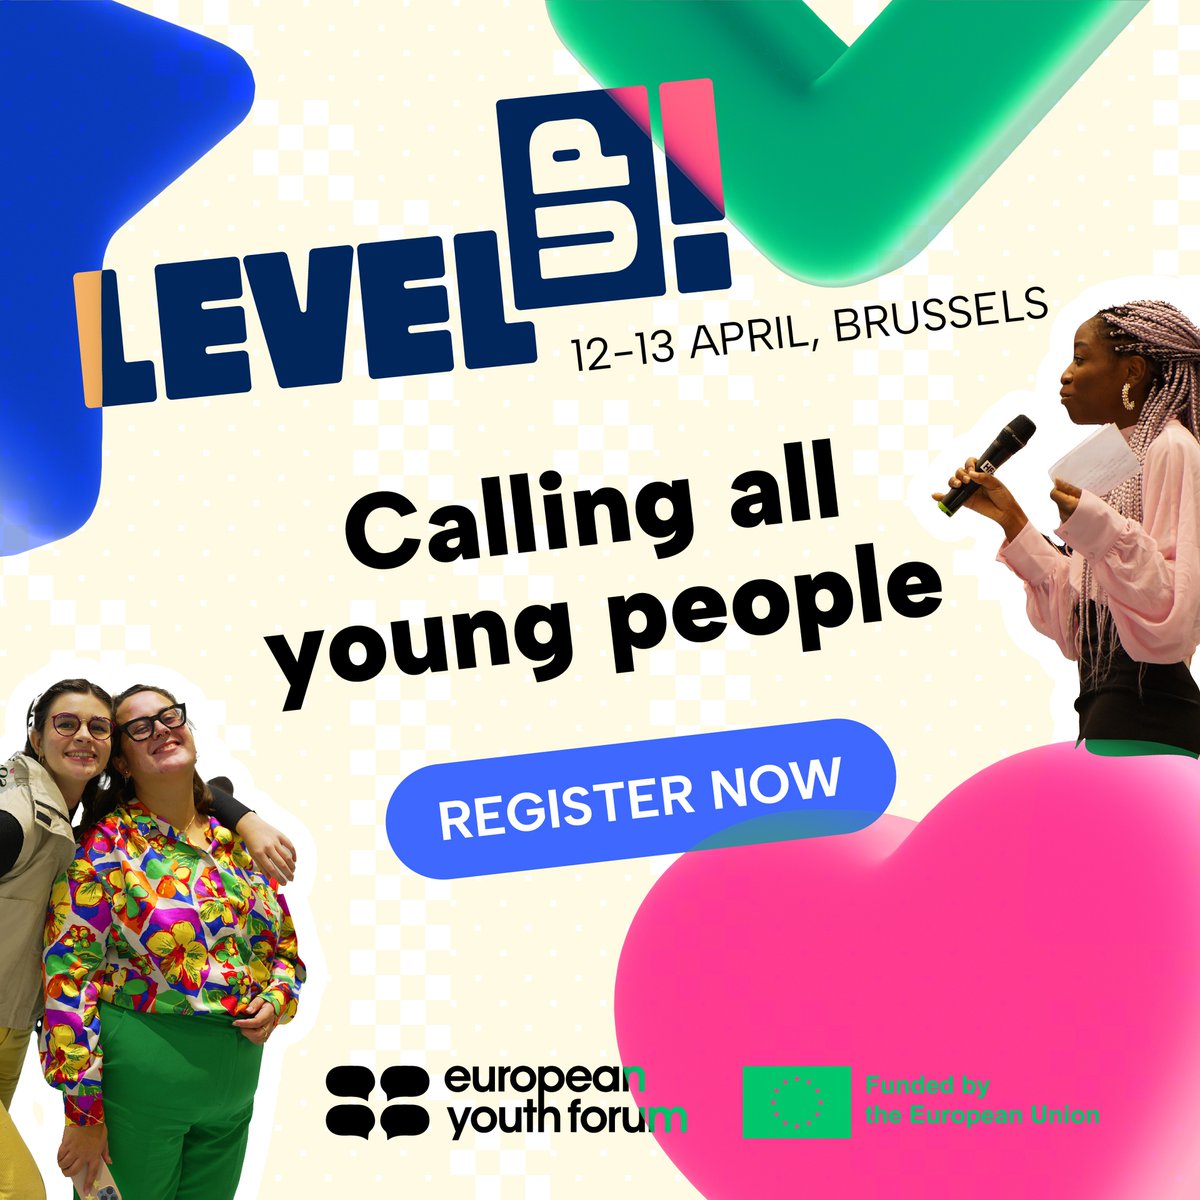 Calling on 1200 shining stars ✨ to transform the European Parliament into a skills training ✊ Whoever, wherever in Europe you are, it's your time to shine! Register now for #LevelUP24 🧭 visit Brussels and develop new skills ➡️ youthforum.org/lvlup24